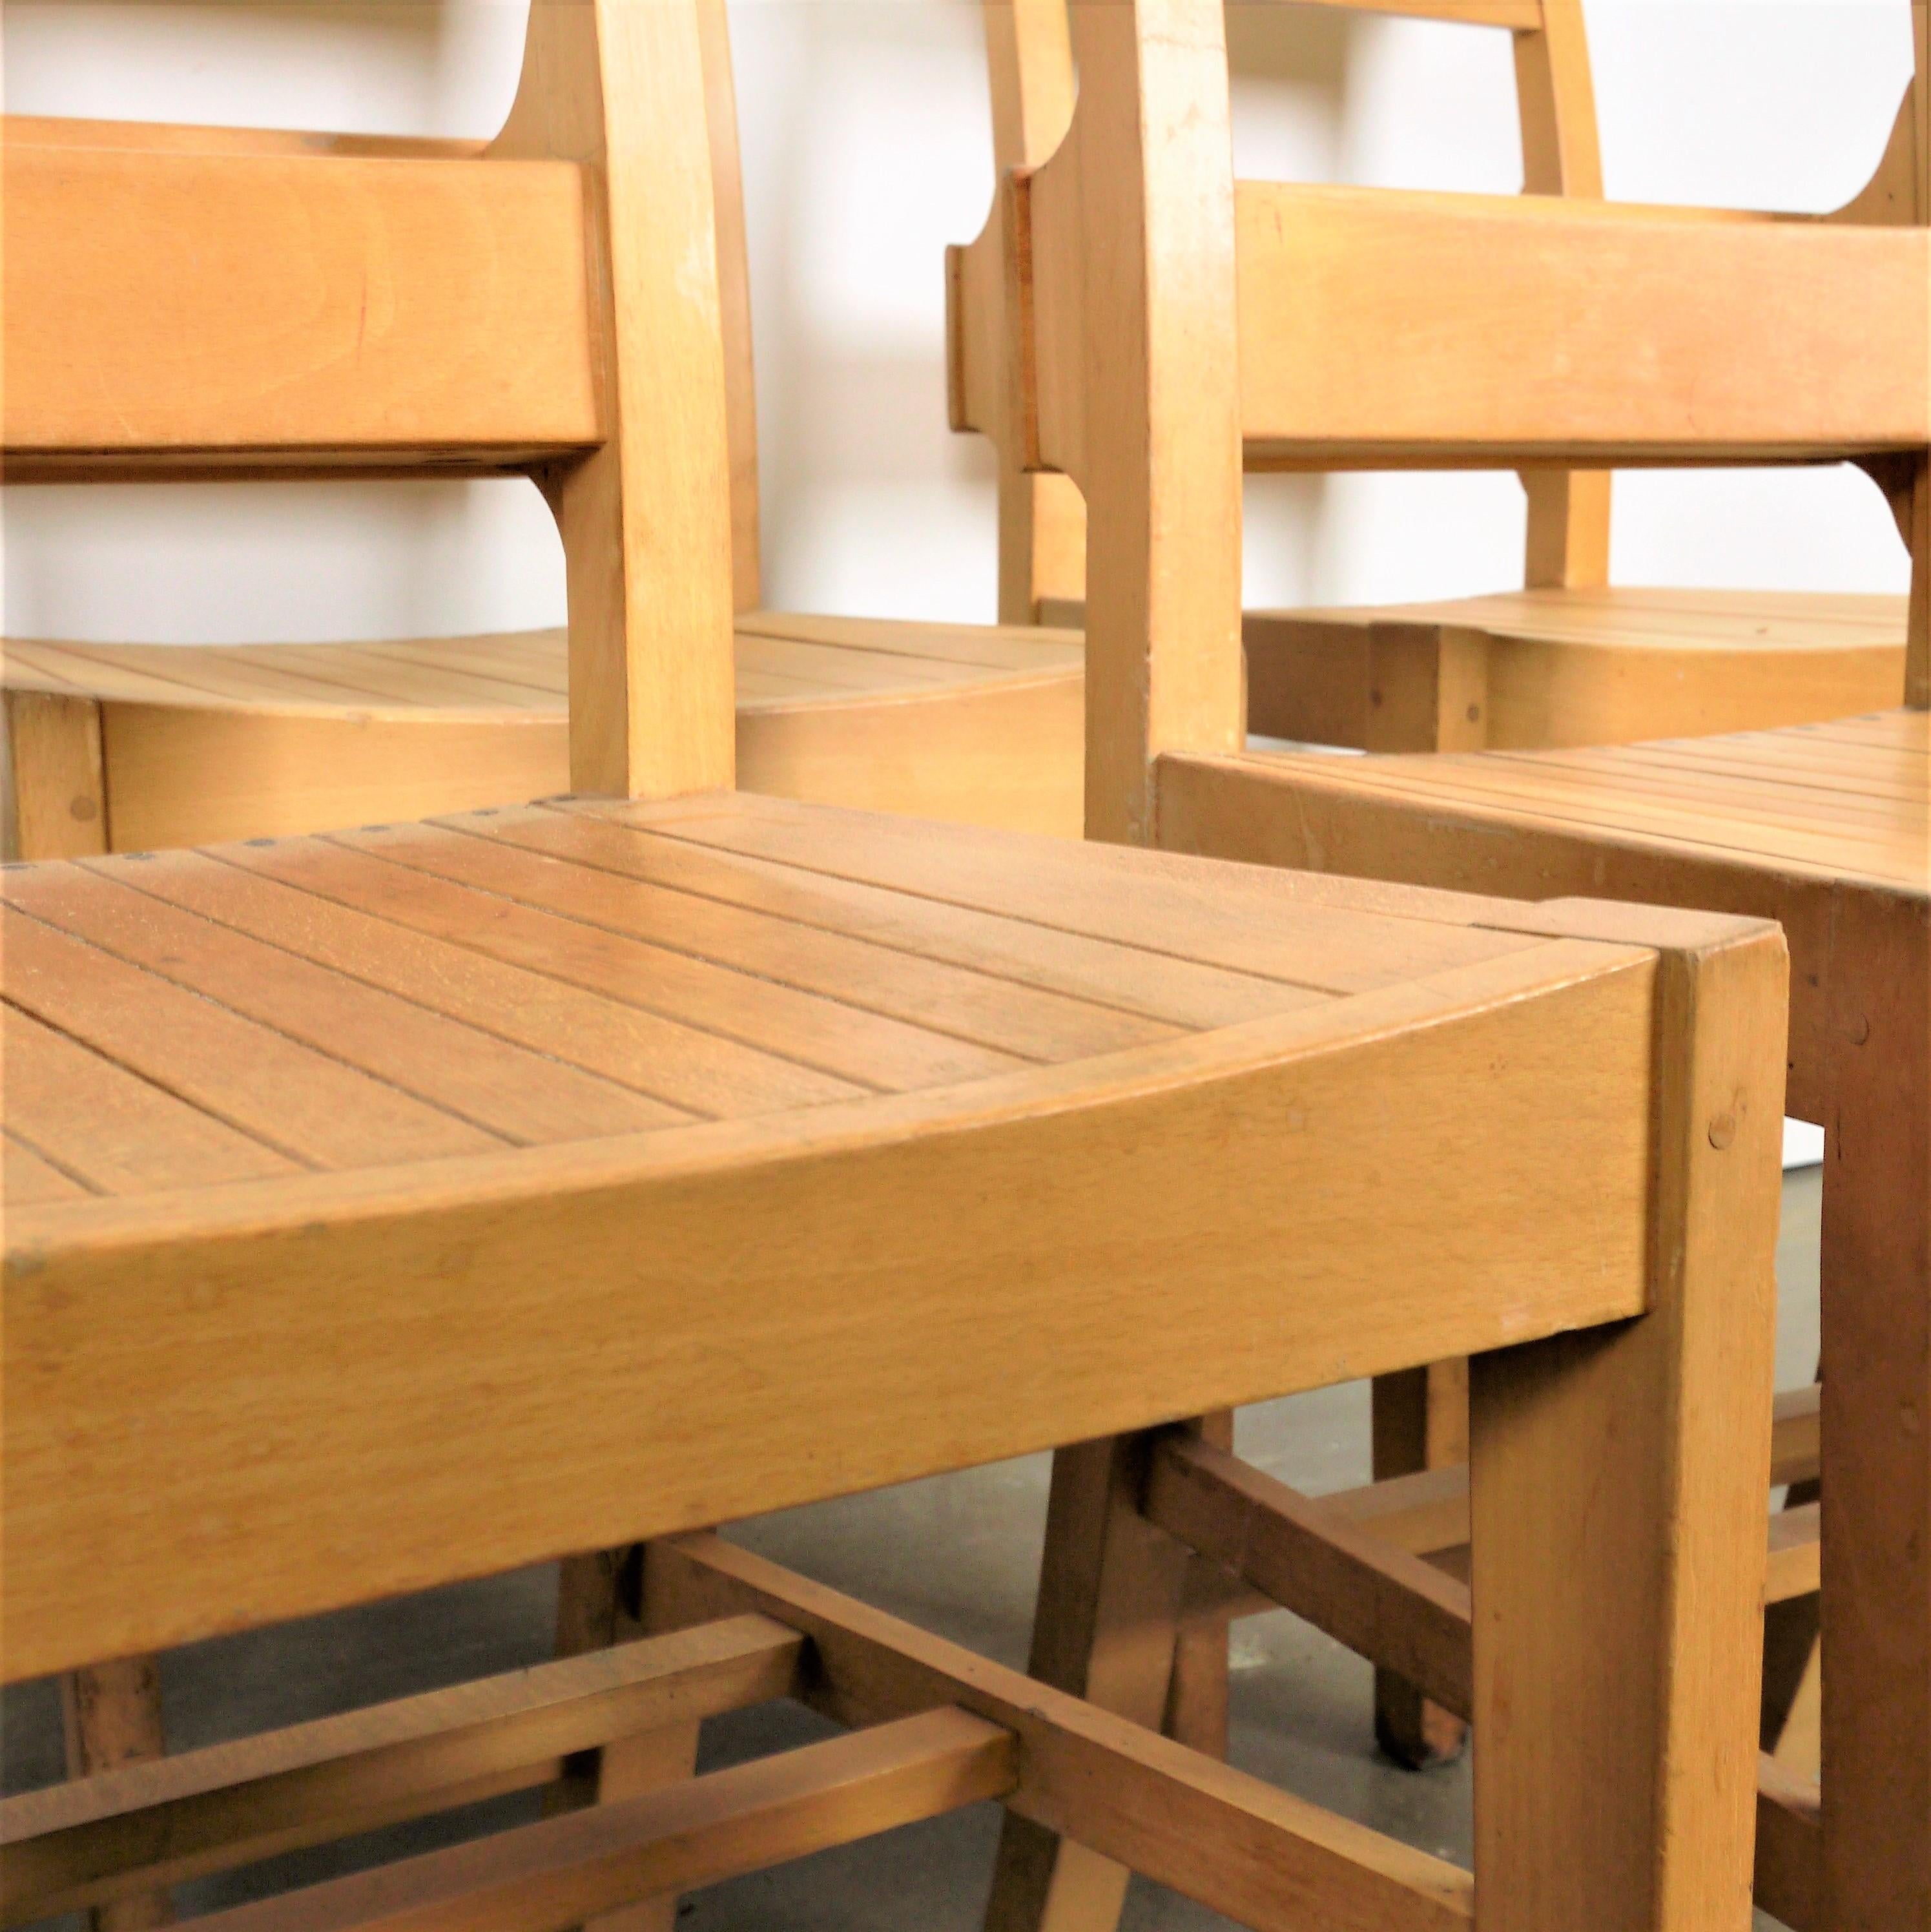 1960s dining church/chapel chairs in beechwood - Set of four - Other quantities available

Set of four 1960s vintage beechwood dining Chapel/Church chairs. We were contacted by St Laurence's Church in Ludlow who were in the middle of a